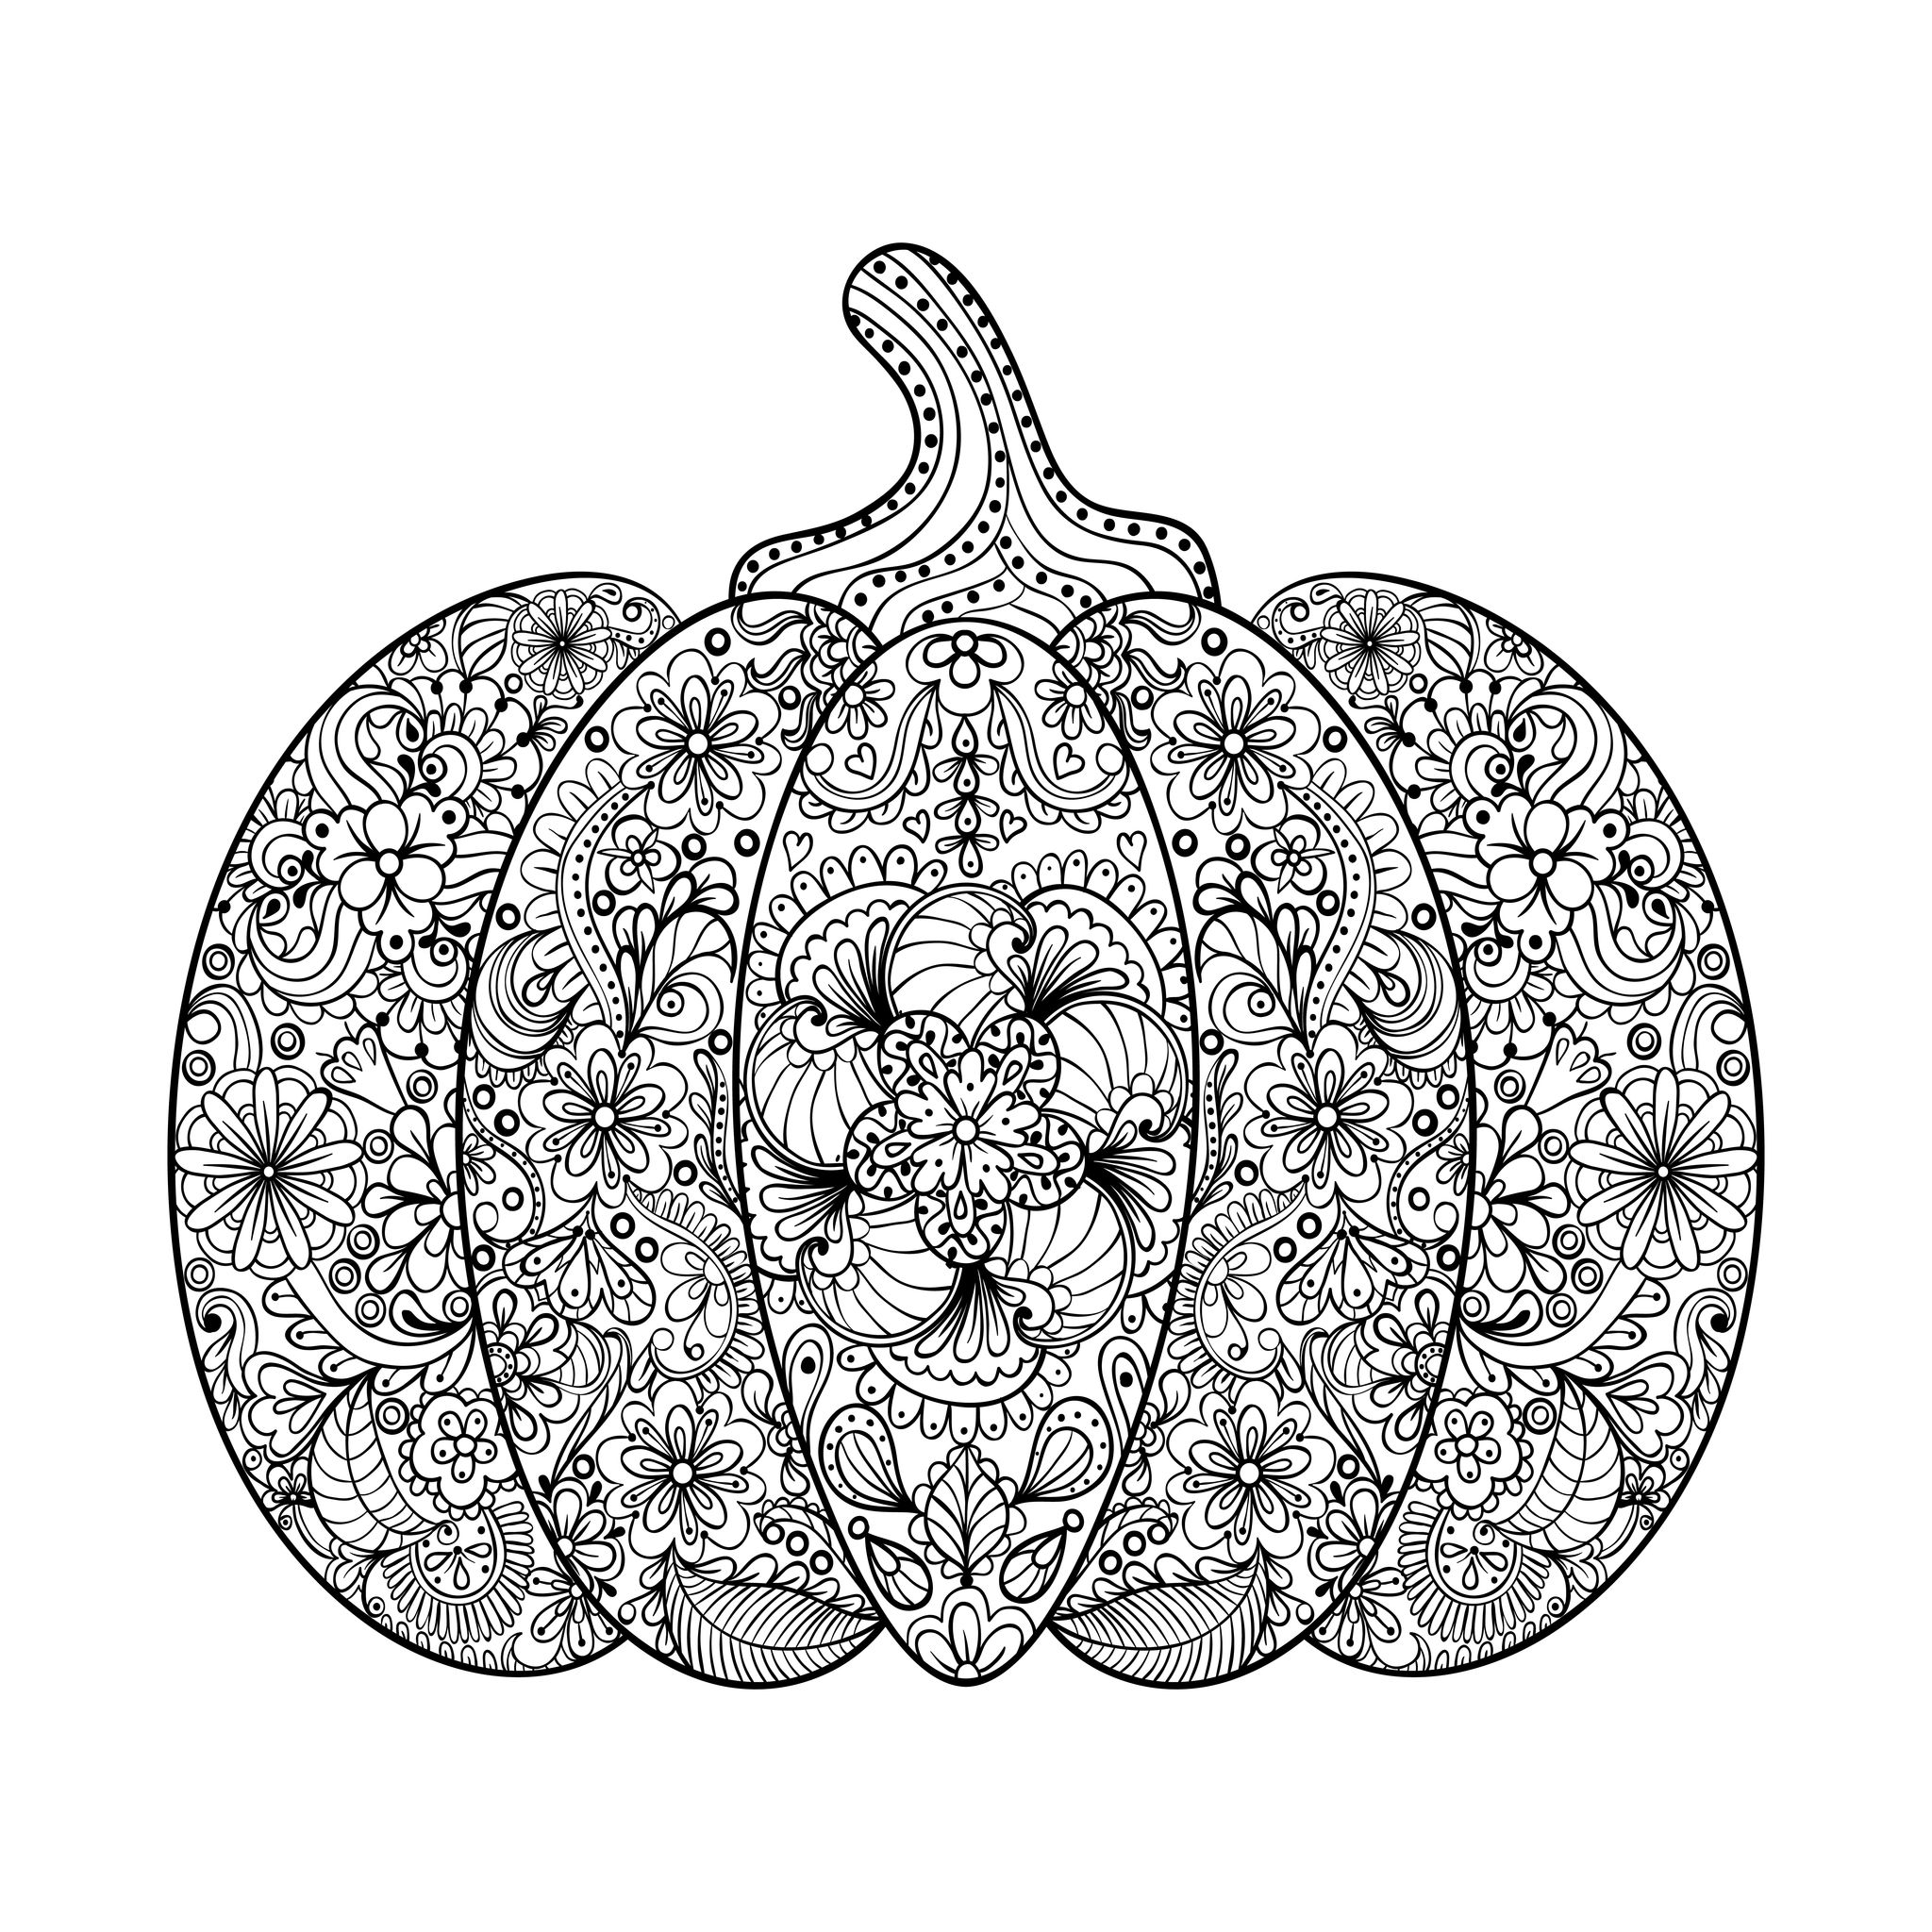 51457196 - vector pumpkin illustration, hand drawn vegetable in zentangle style, tribal totem for tattoo, adult coloring page with high details isolated on white background.